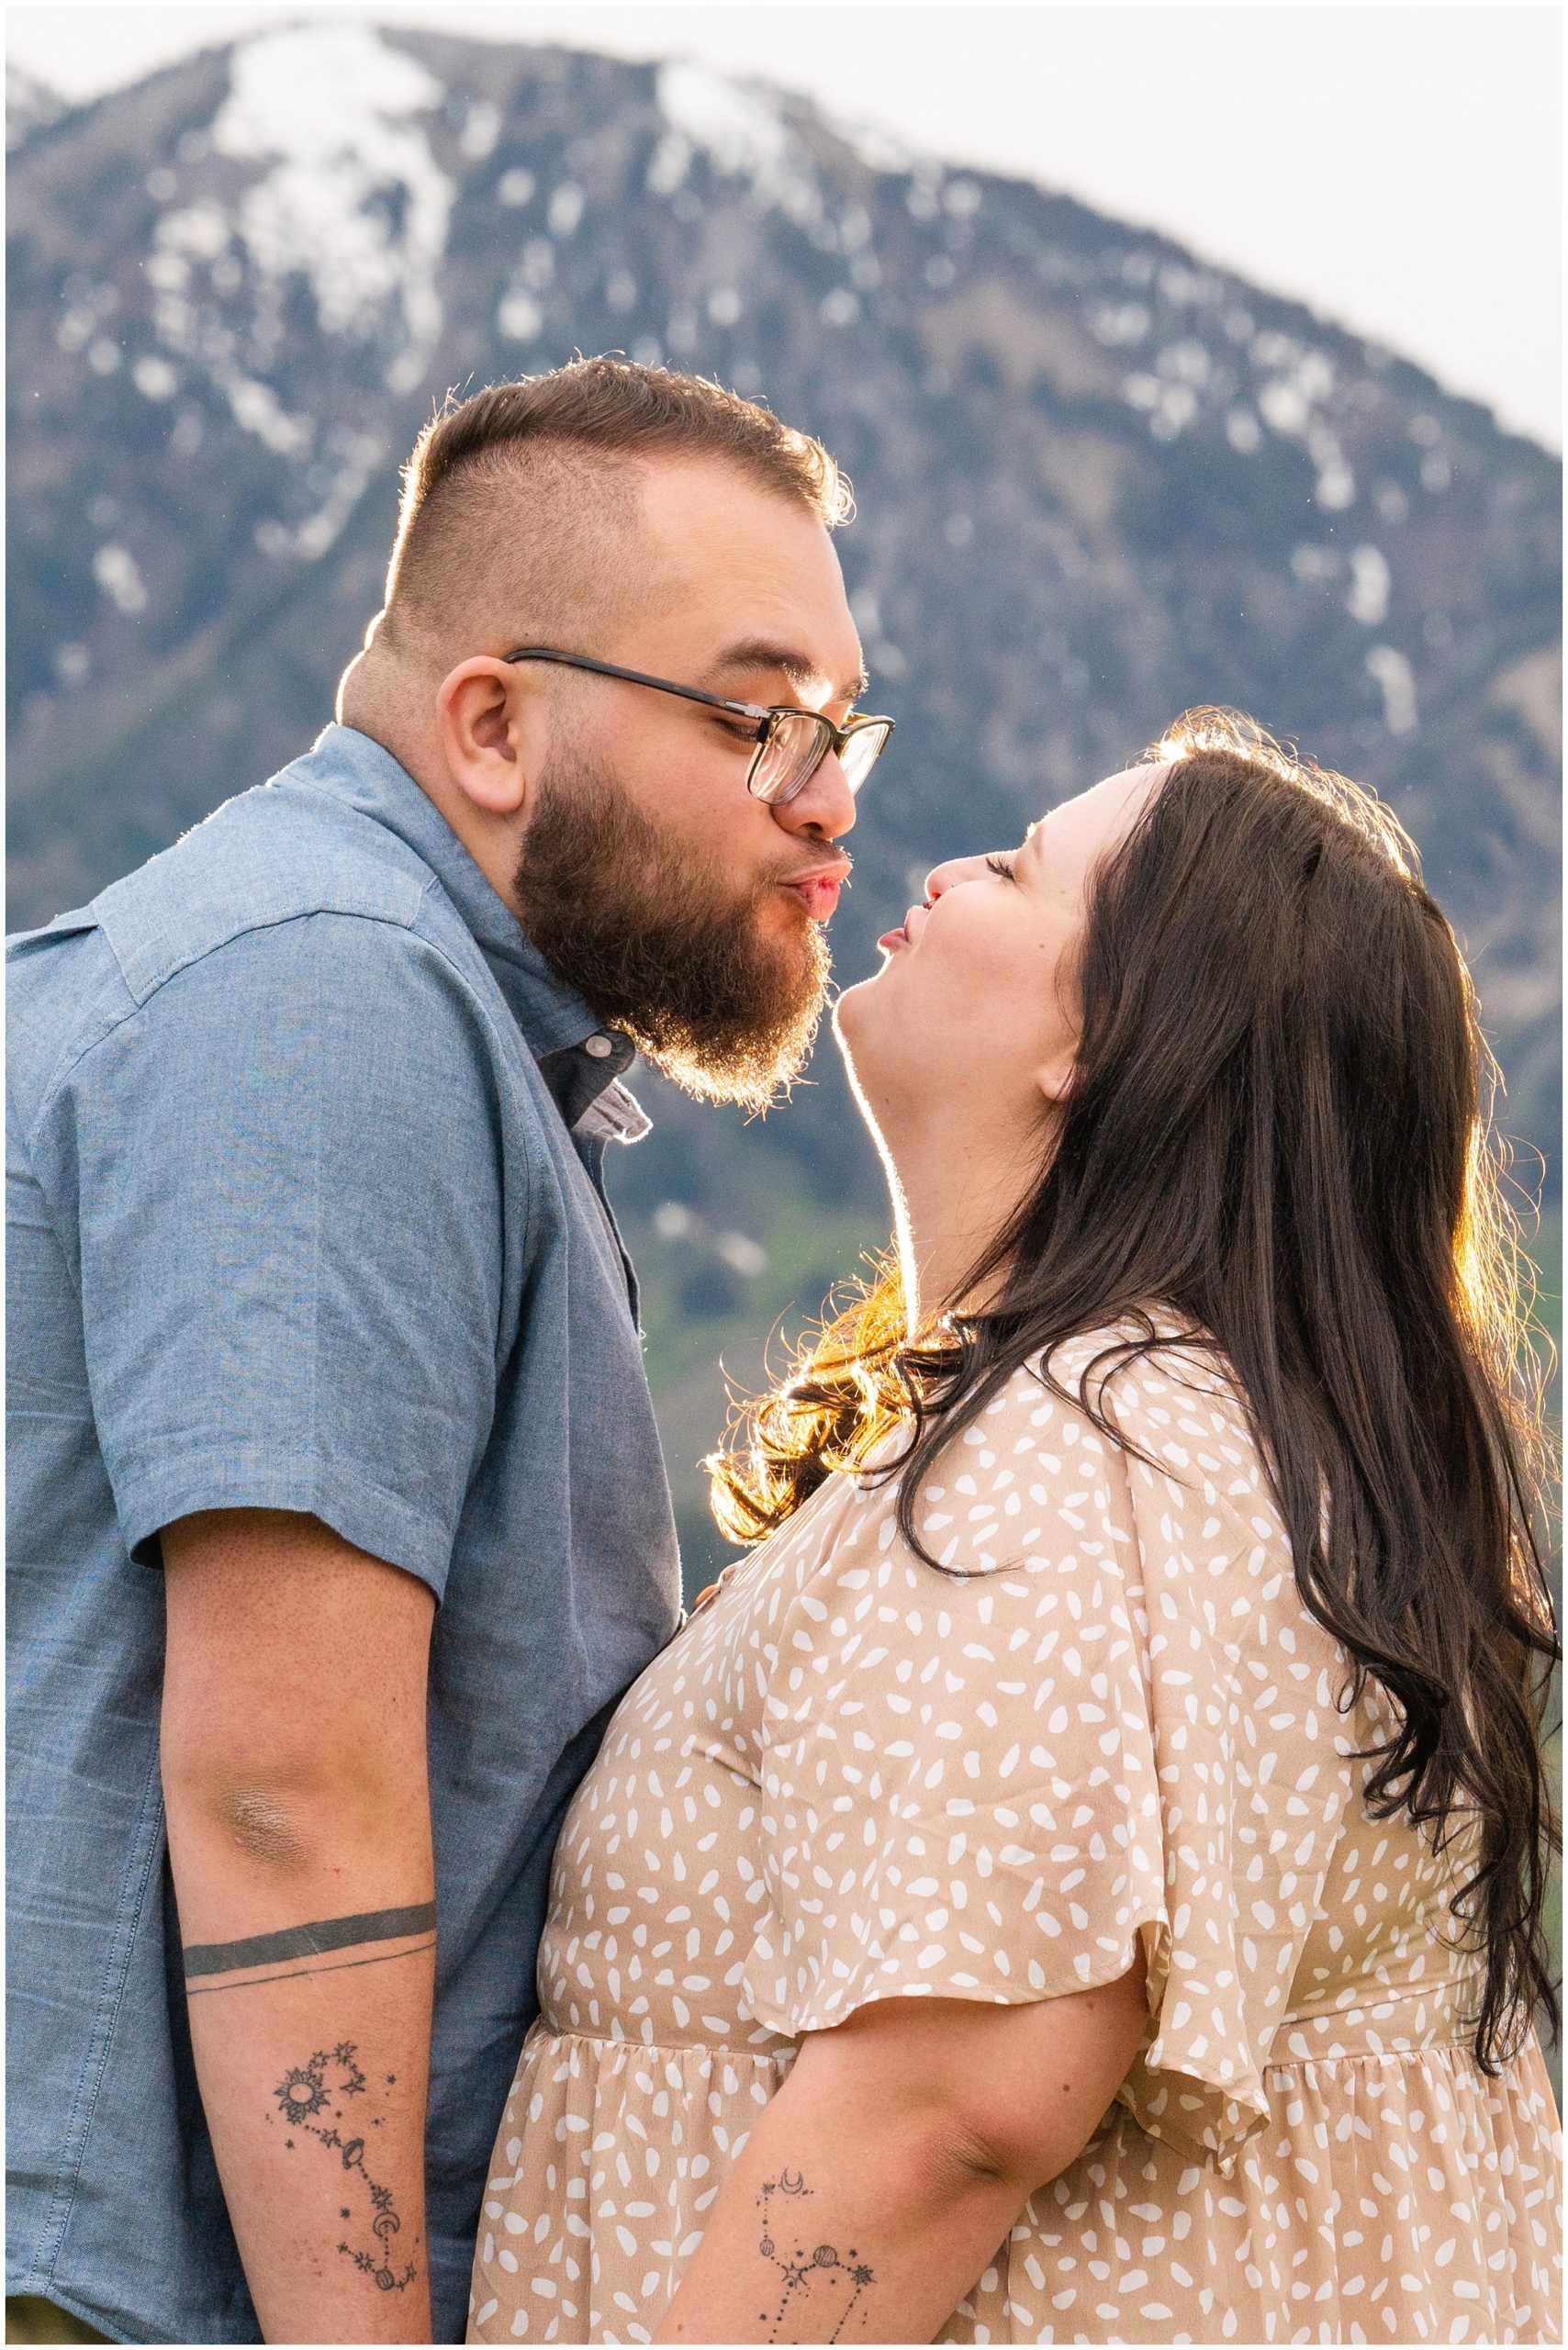 Couple during engagement session in yellow sunflower wildflowers surrounded by snowy mountain peaks | Ogden Valley Summer Engagement Session